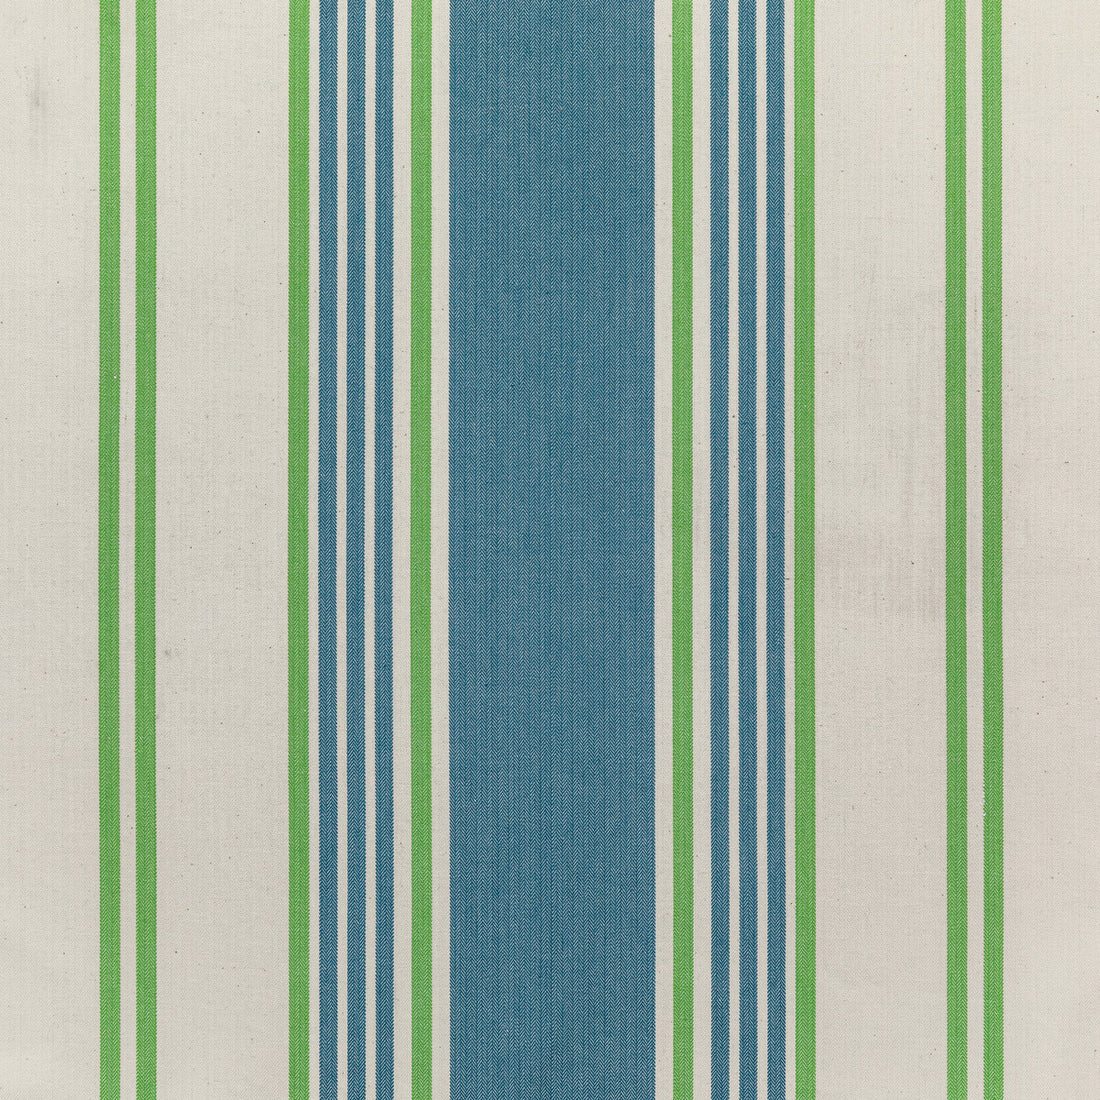 Derby Stripe fabric in blue/green color - pattern BFC-3686.523.0 - by Lee Jofa in the Blithfield collection